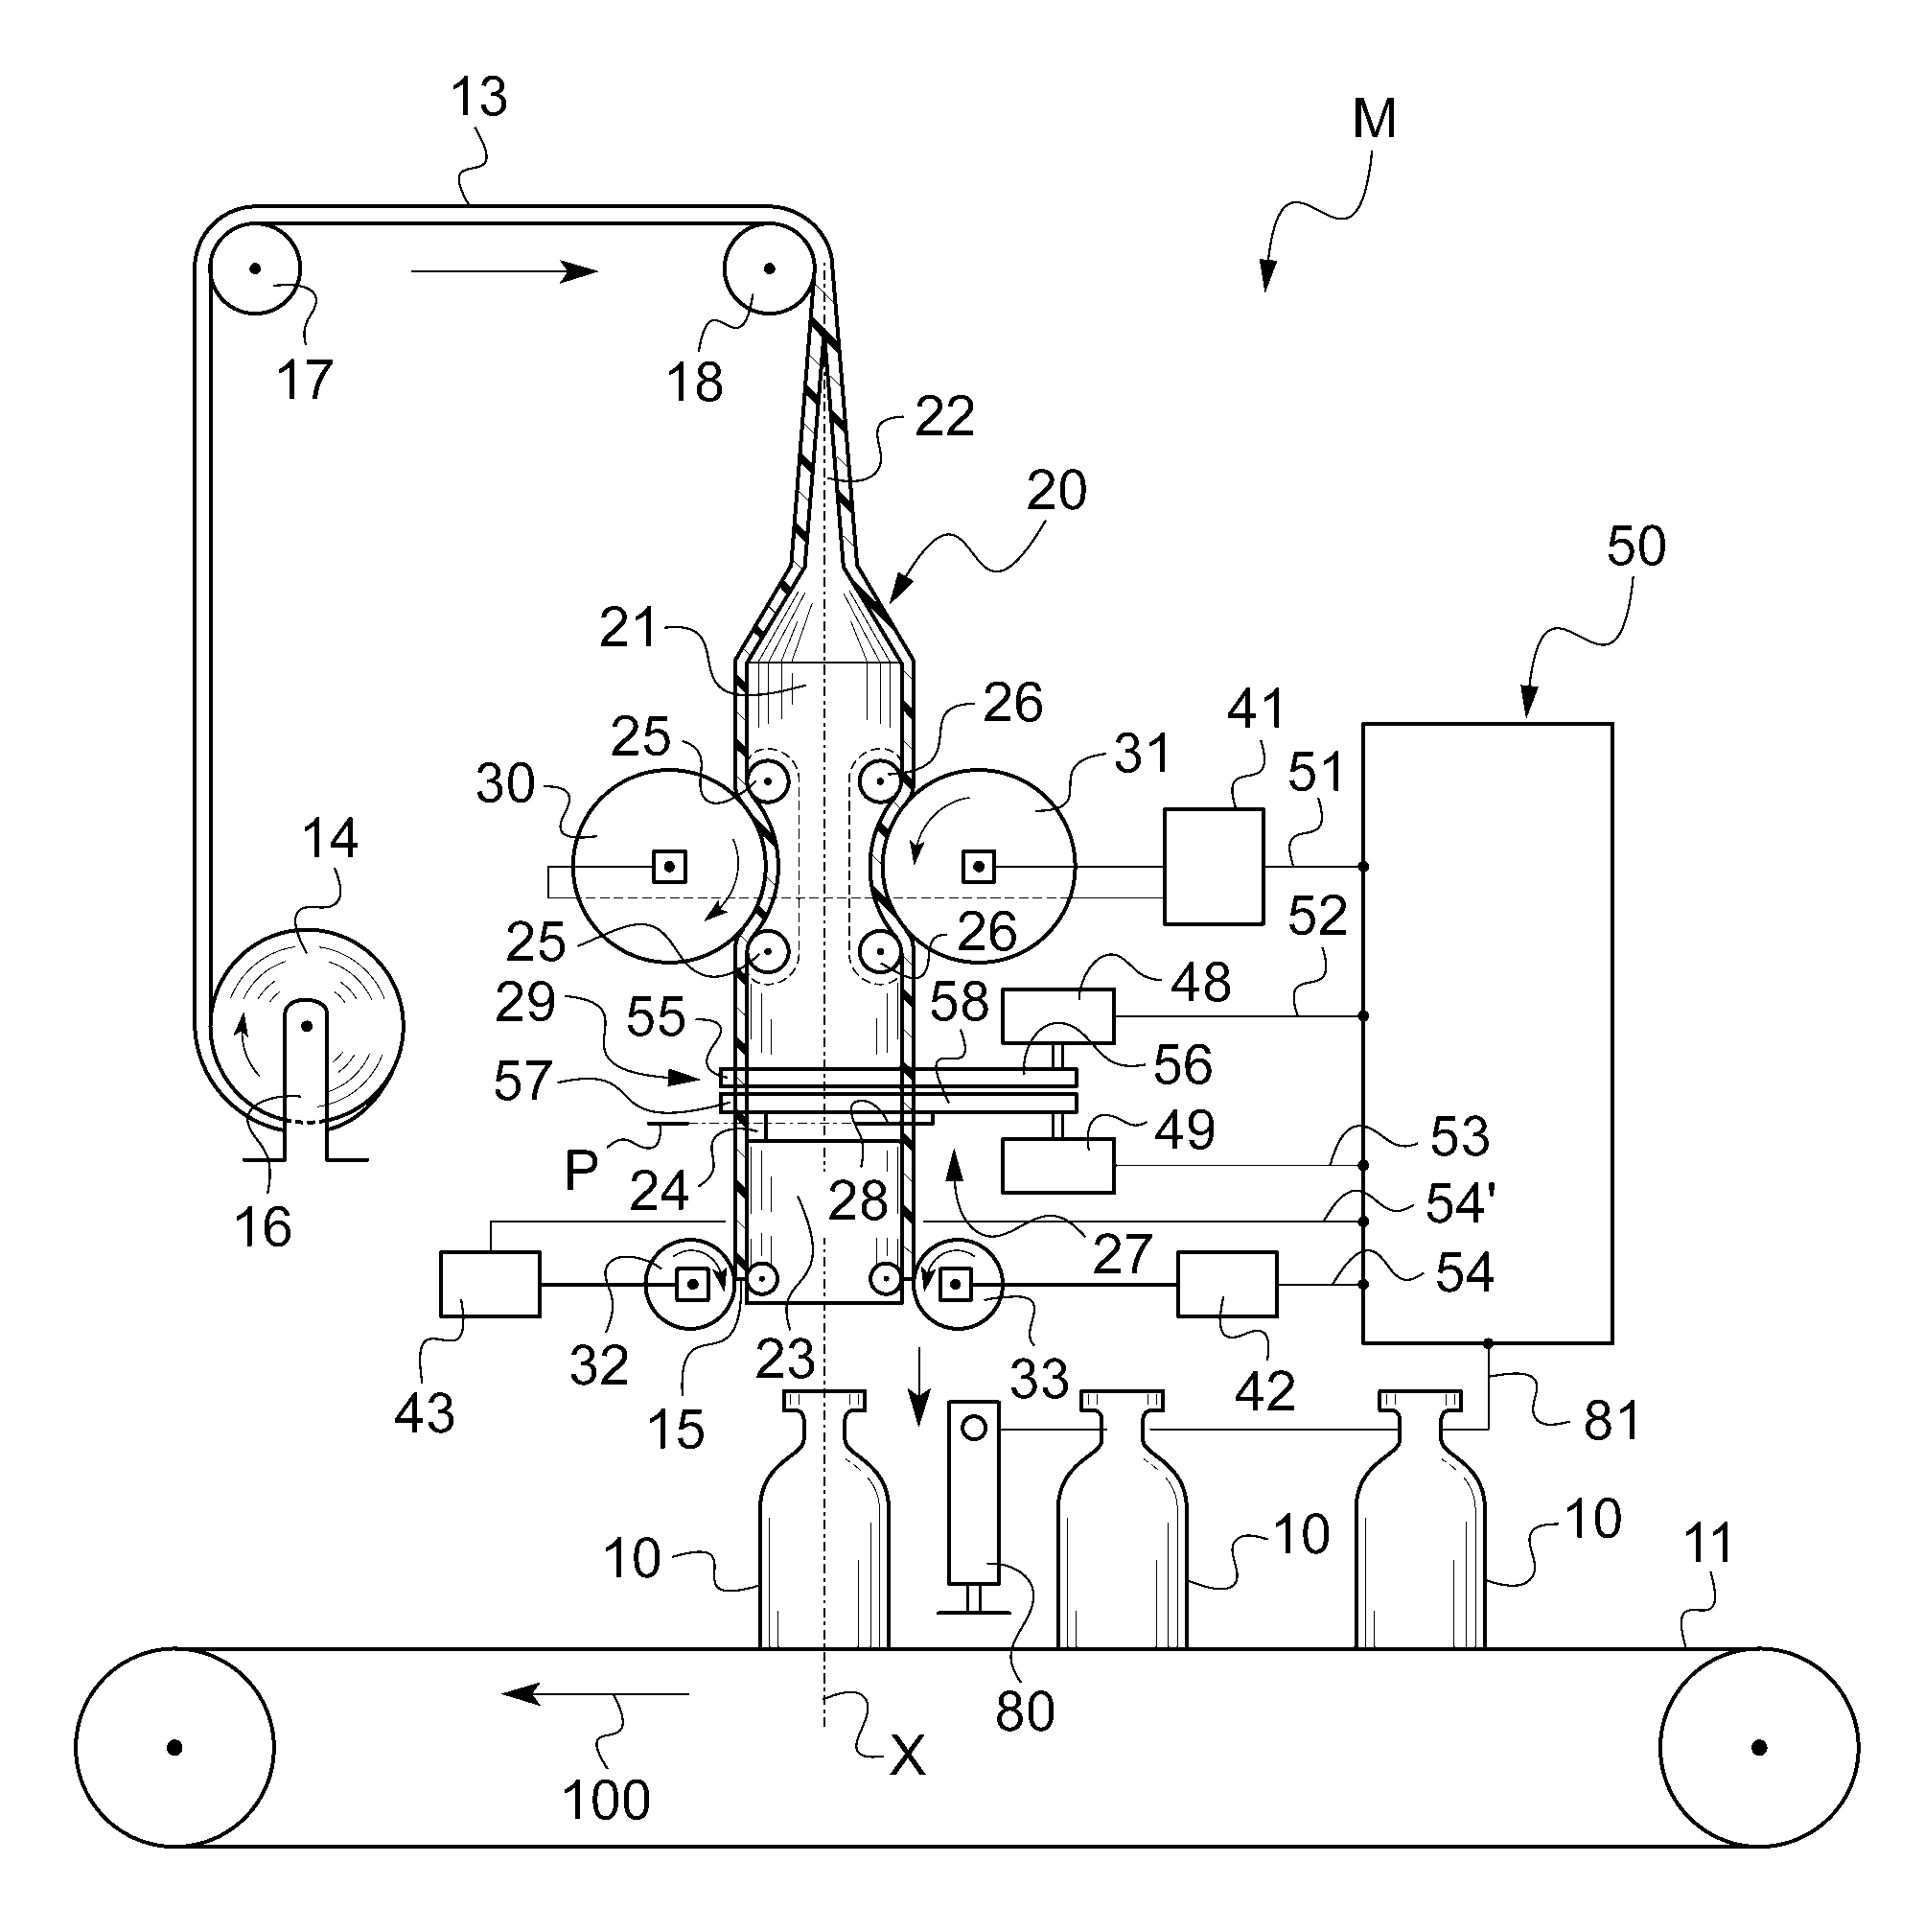 Device for placing sleeves on traveling articles